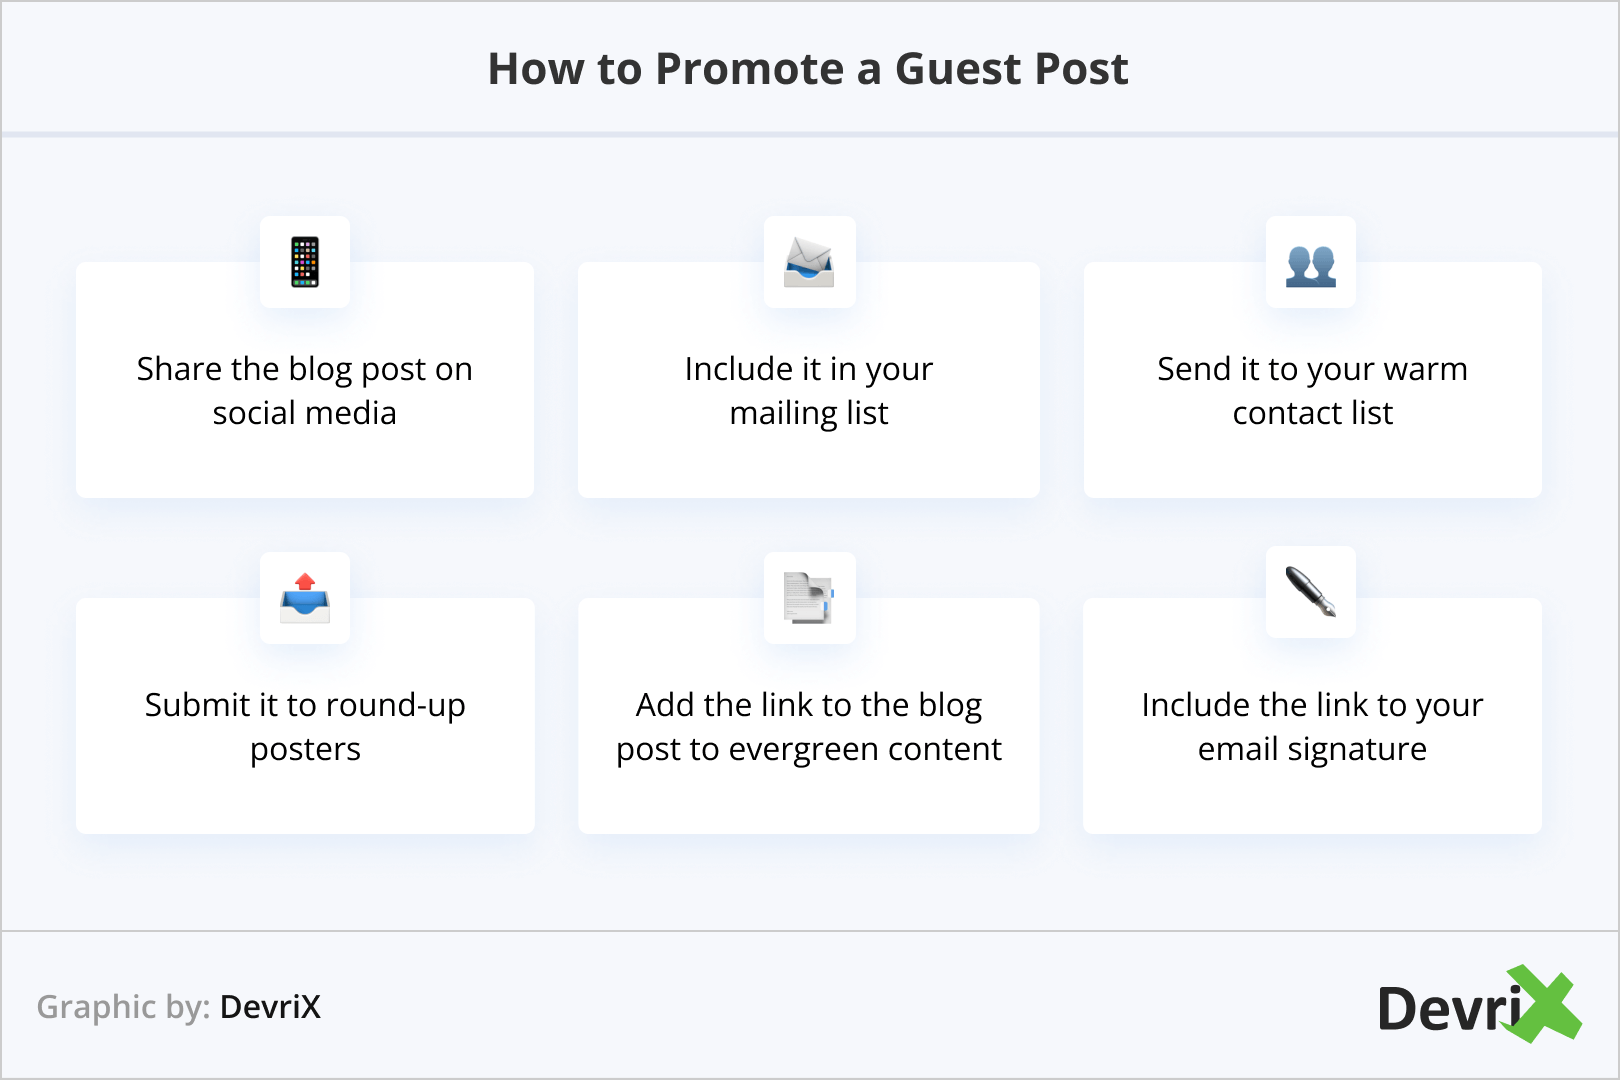 How to Promote a Guest Post